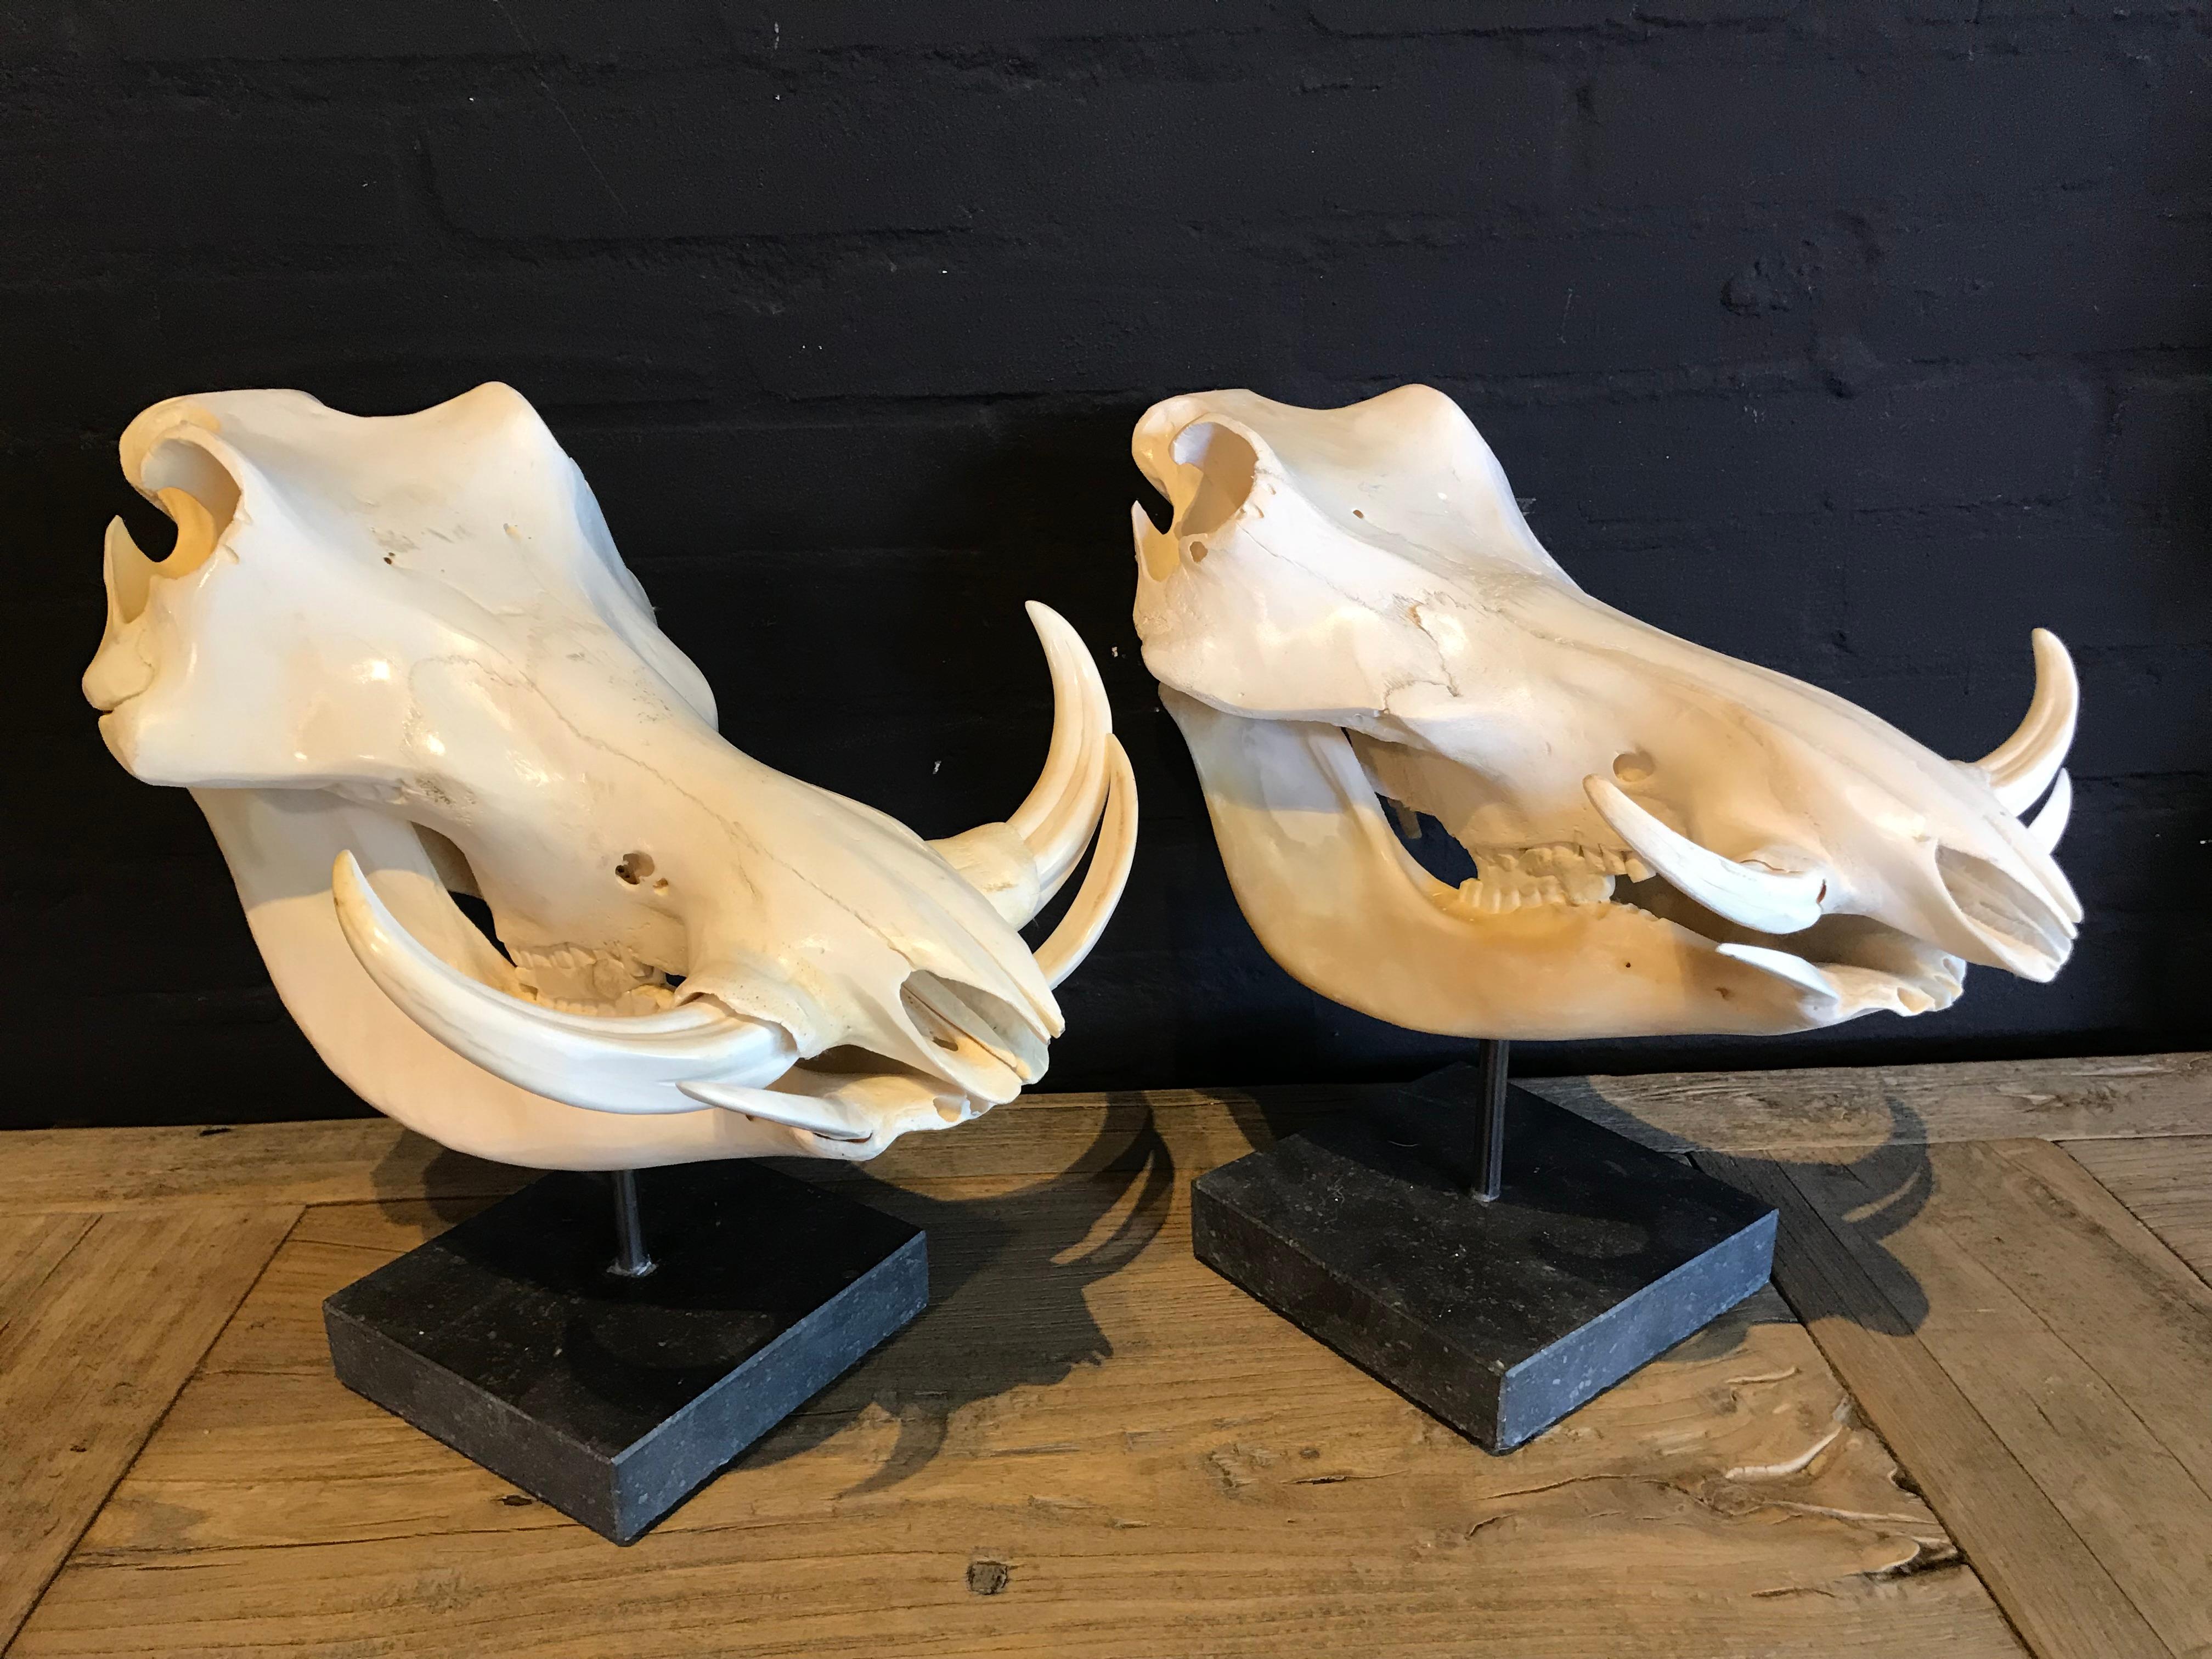 Set of 2 African warthog skulls in excellent condition on a hardstone pedestal.
The skulls are polished and have a light shine patine.